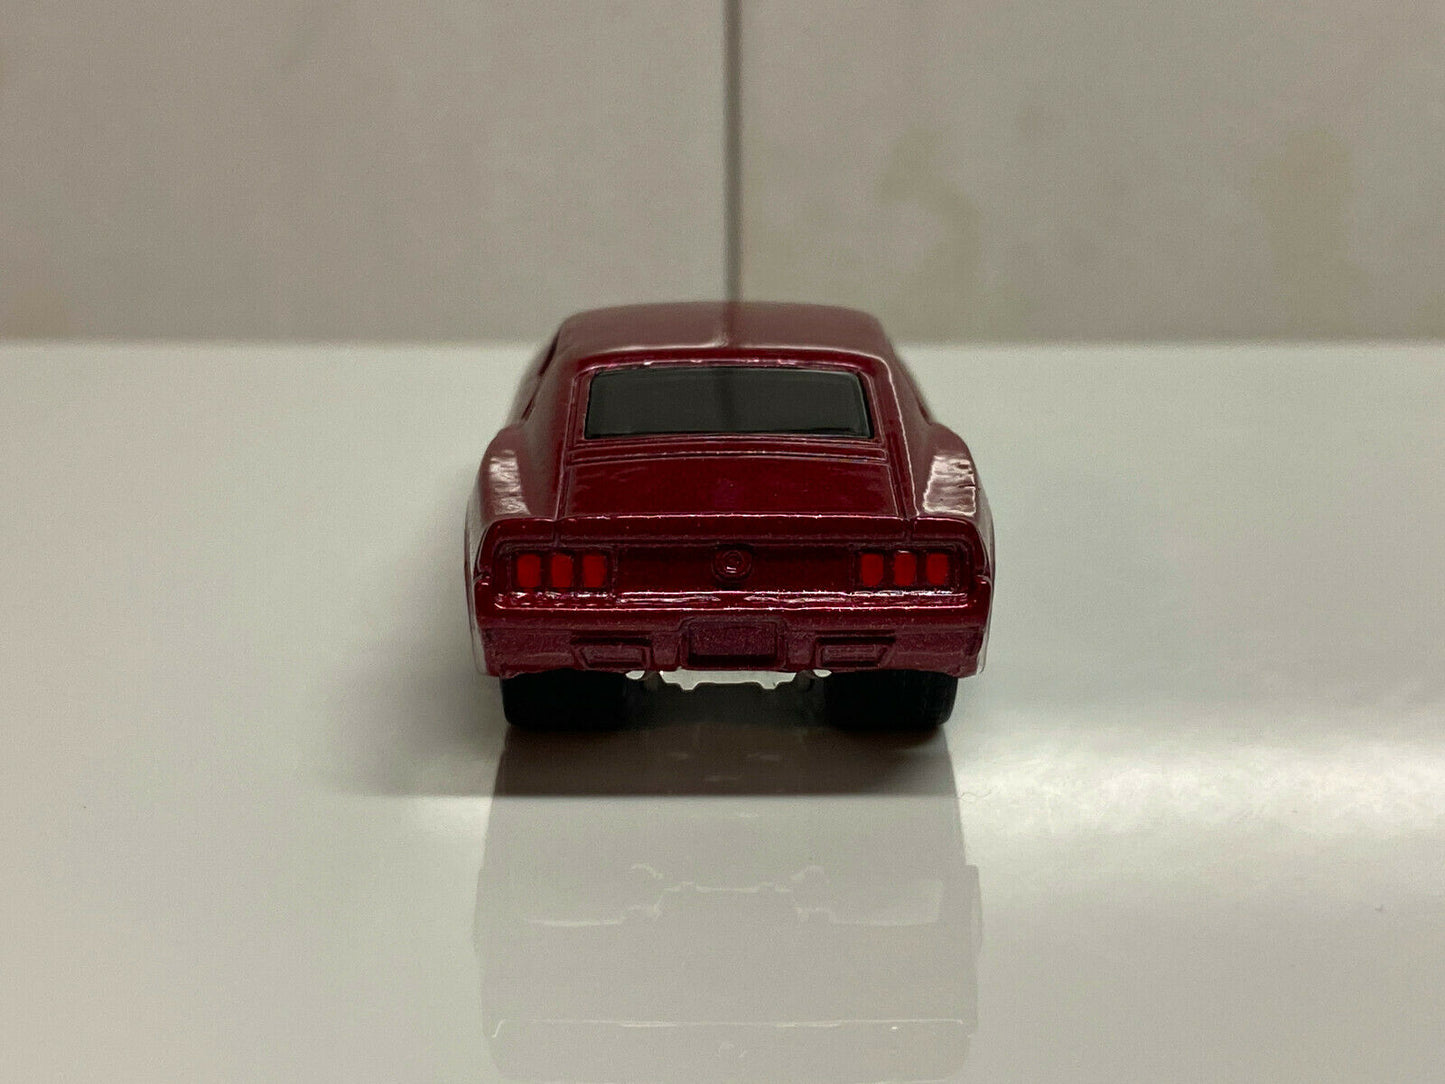 2007 Hot Wheels '69 Ford Mustang RED Super Custom Real Riders